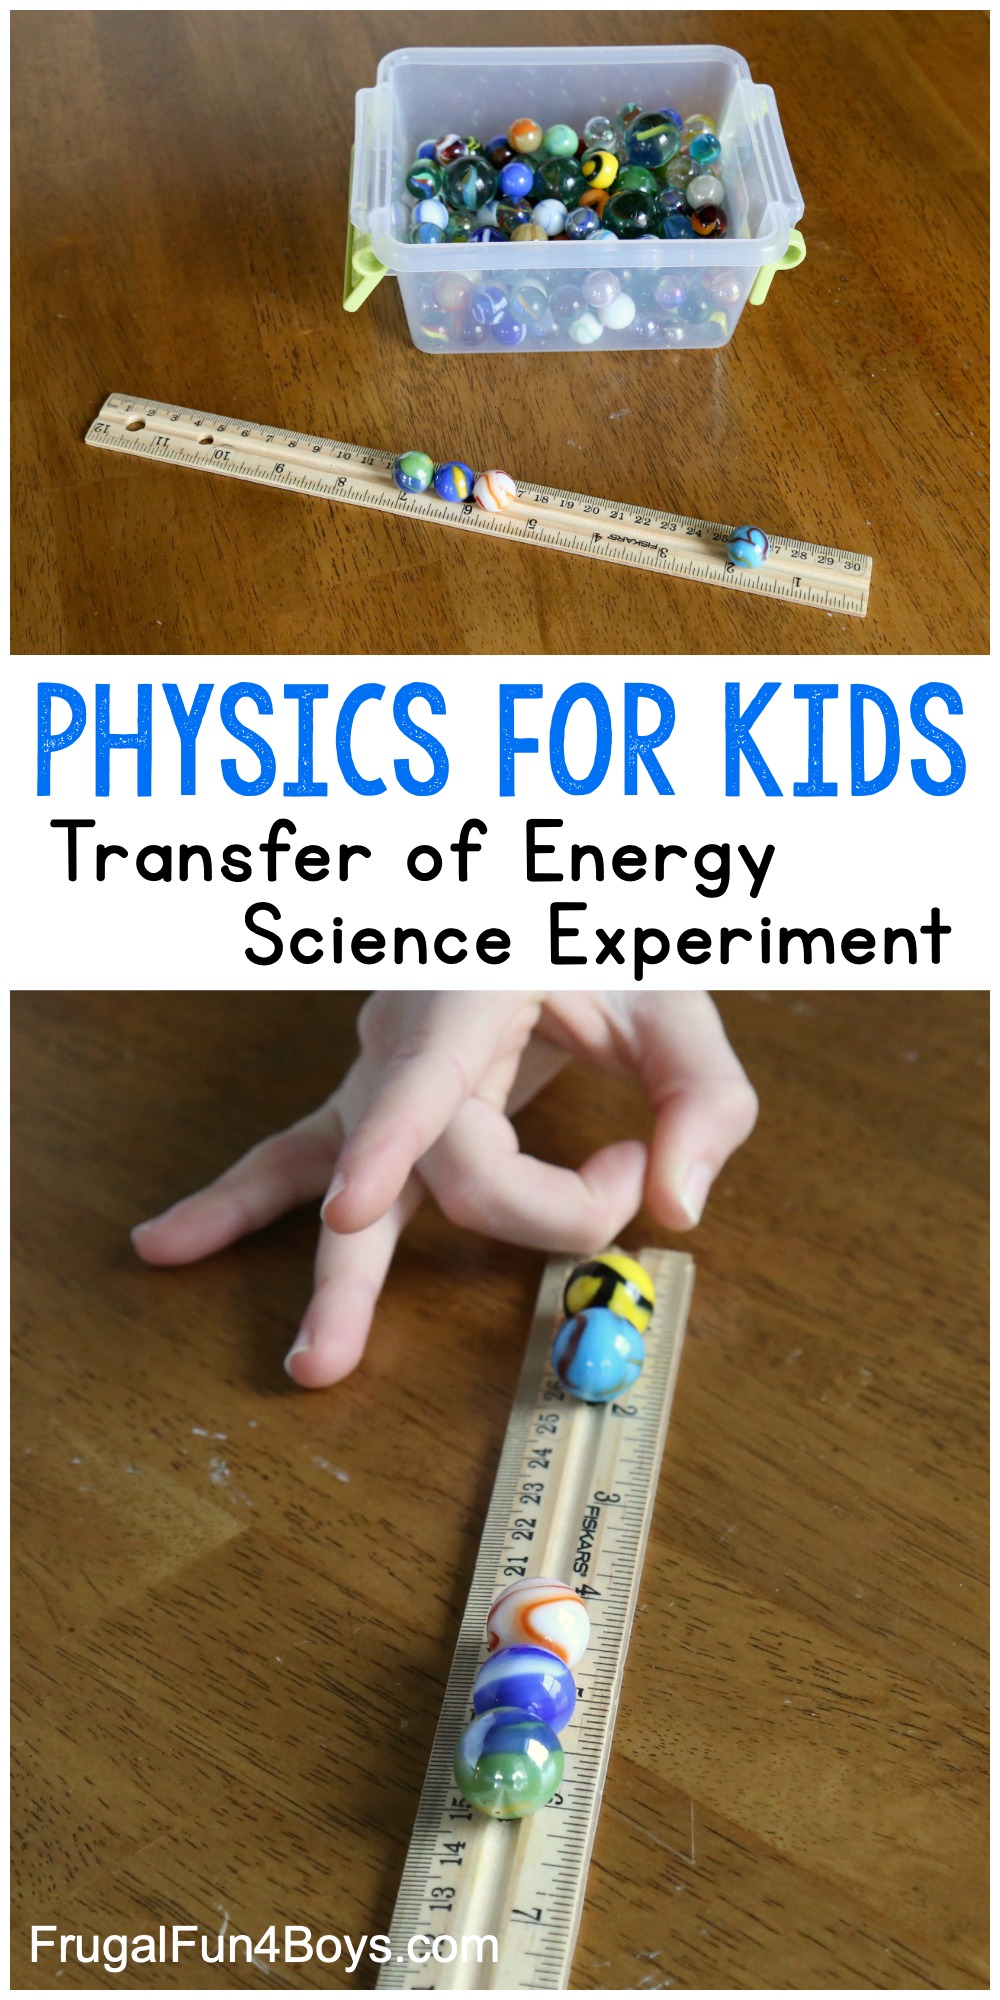 Transfer of Energy Science Experiment